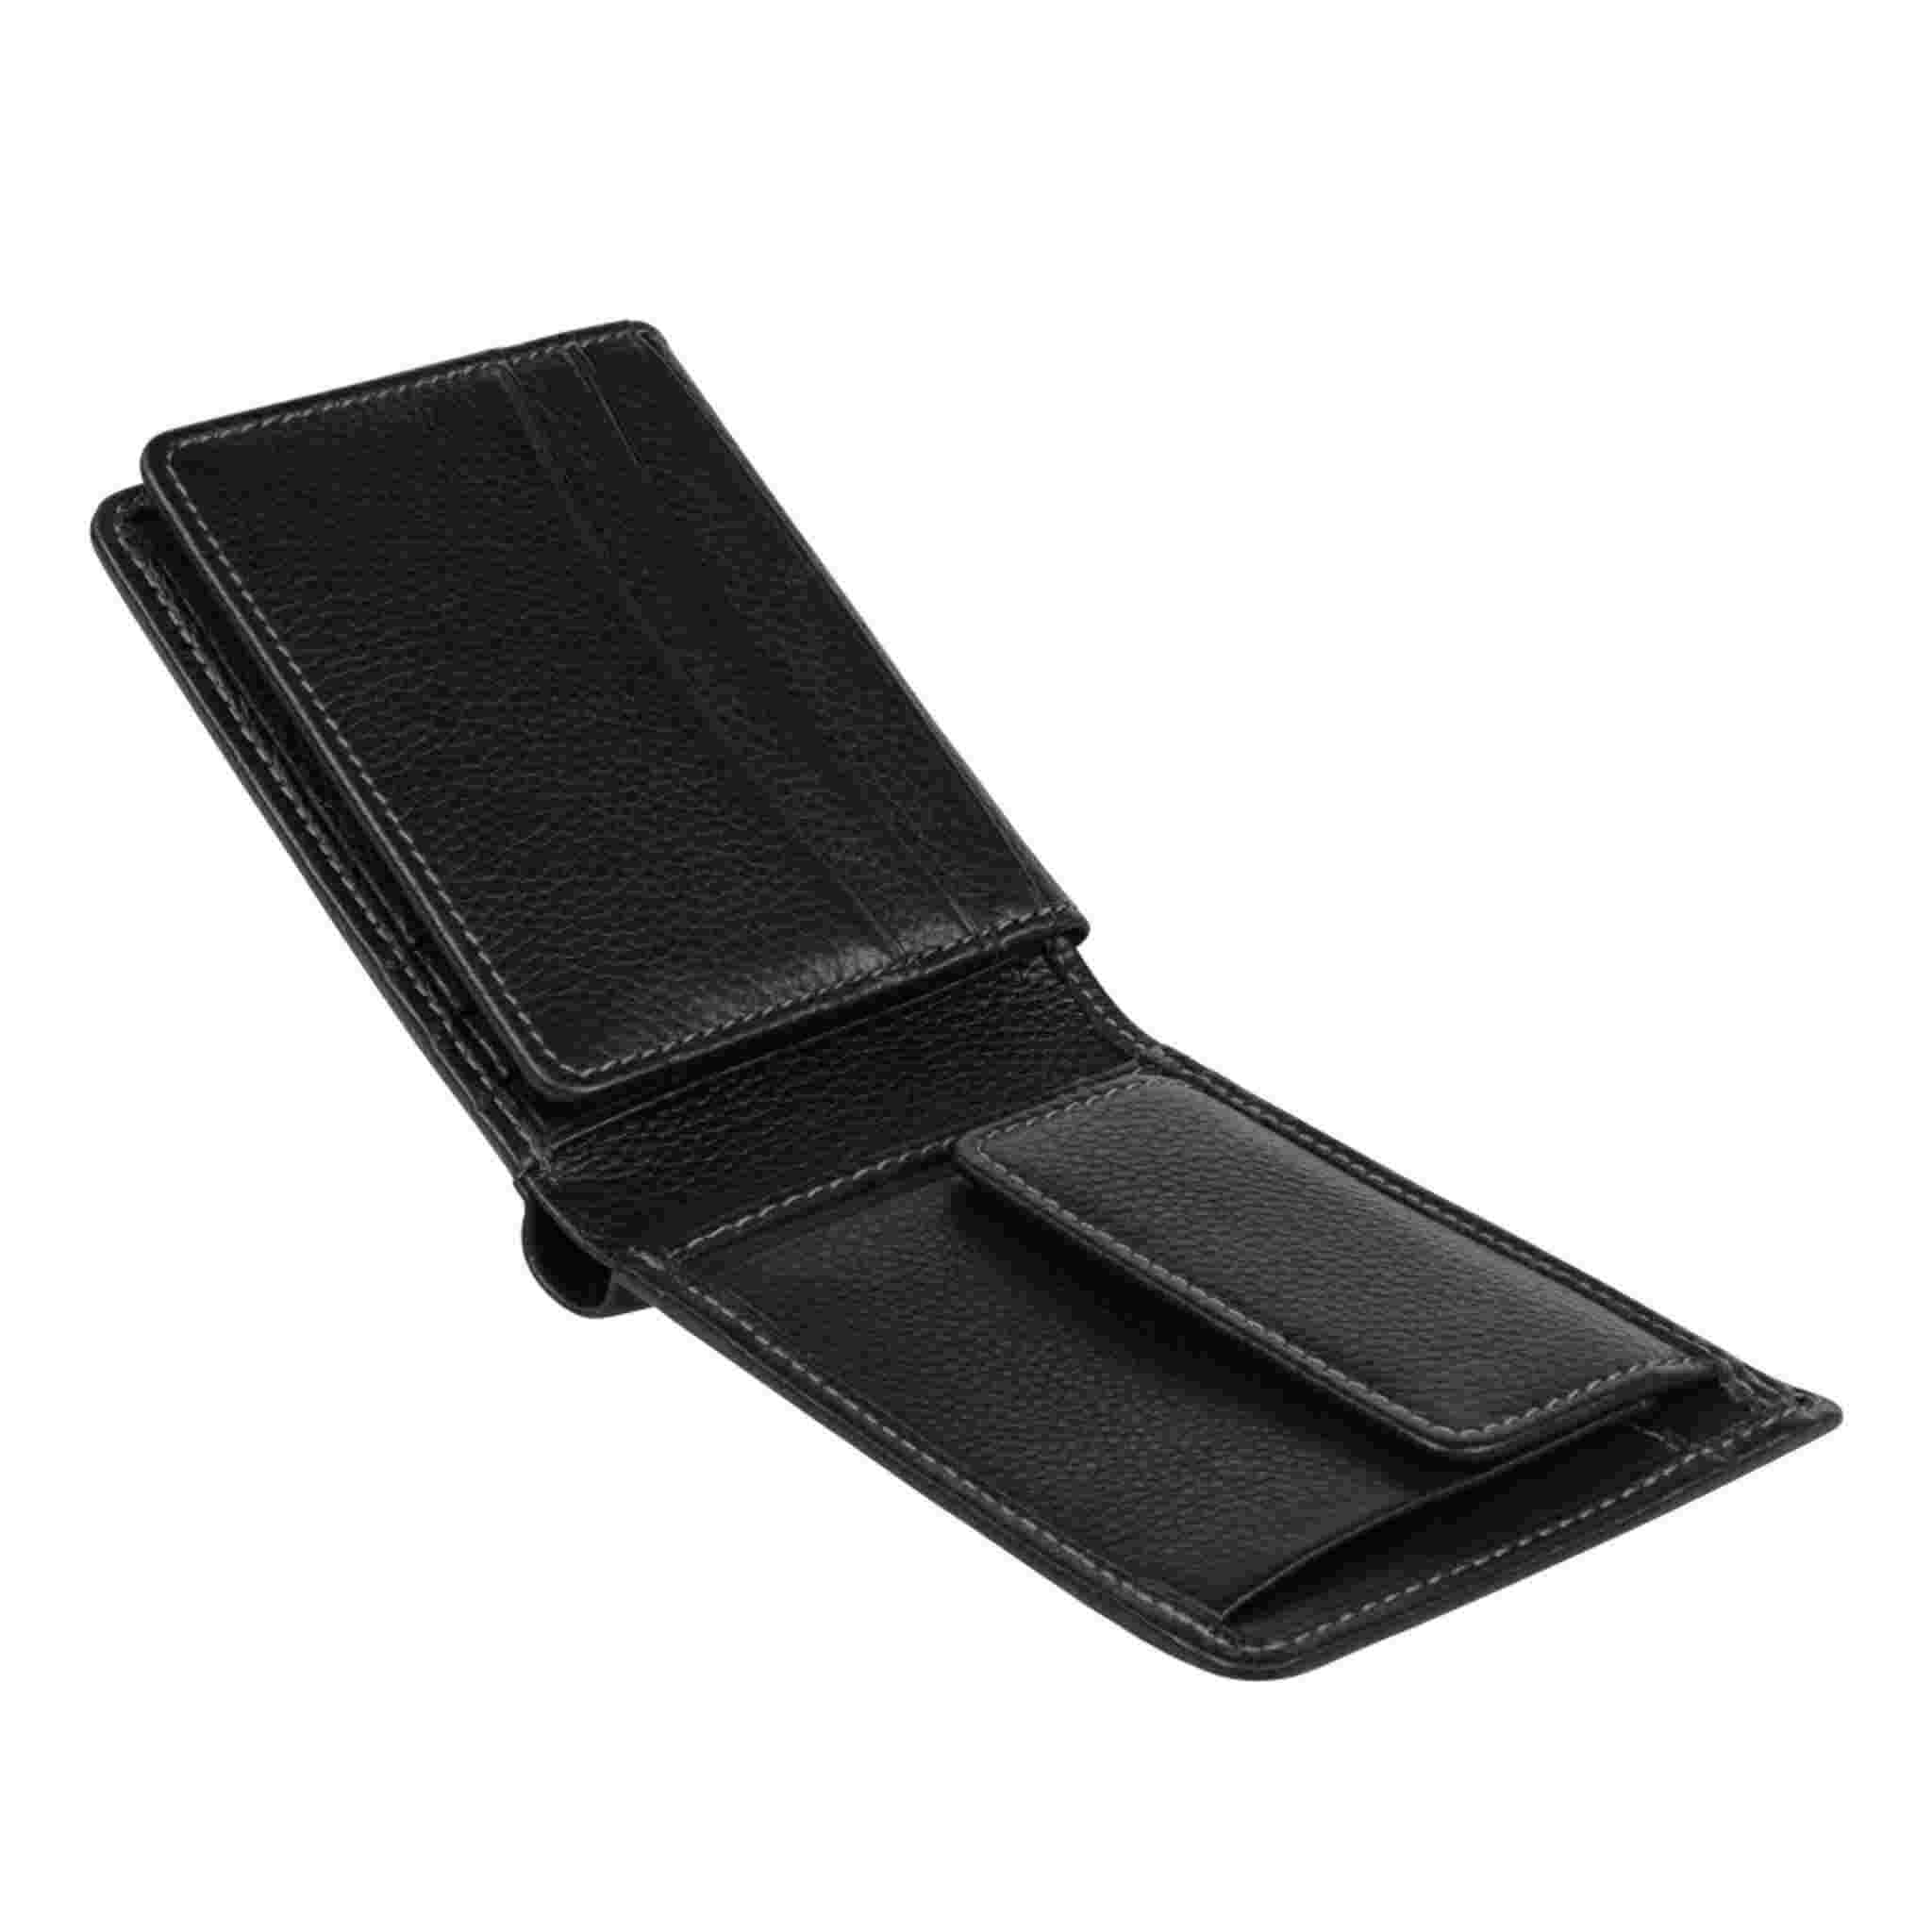 Open empty black wallet showing cash section and card holders